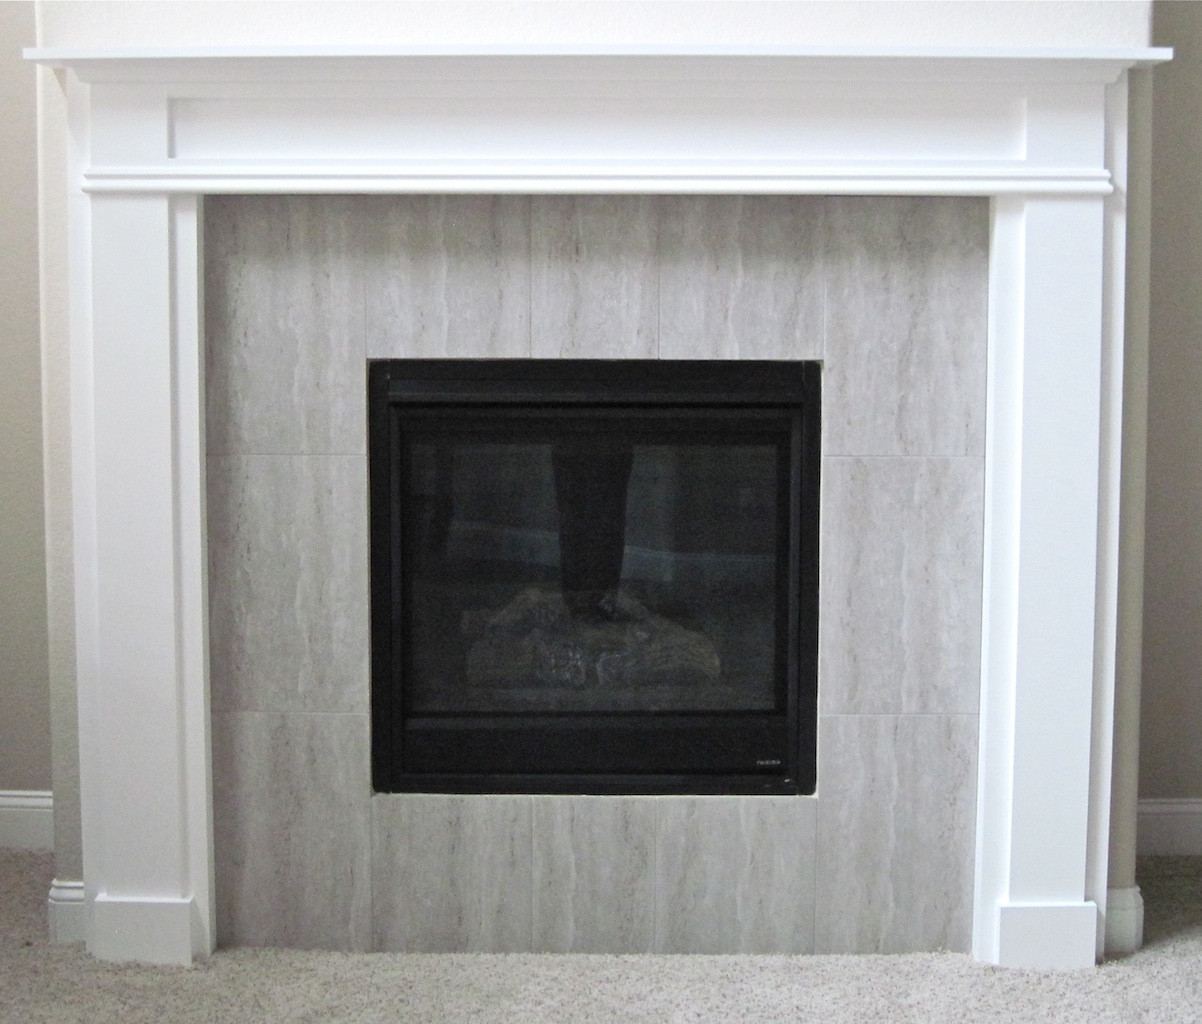 DIY Fireplace Surround
 Give a Makeover to Your Fireplace with a DIY Fireplace